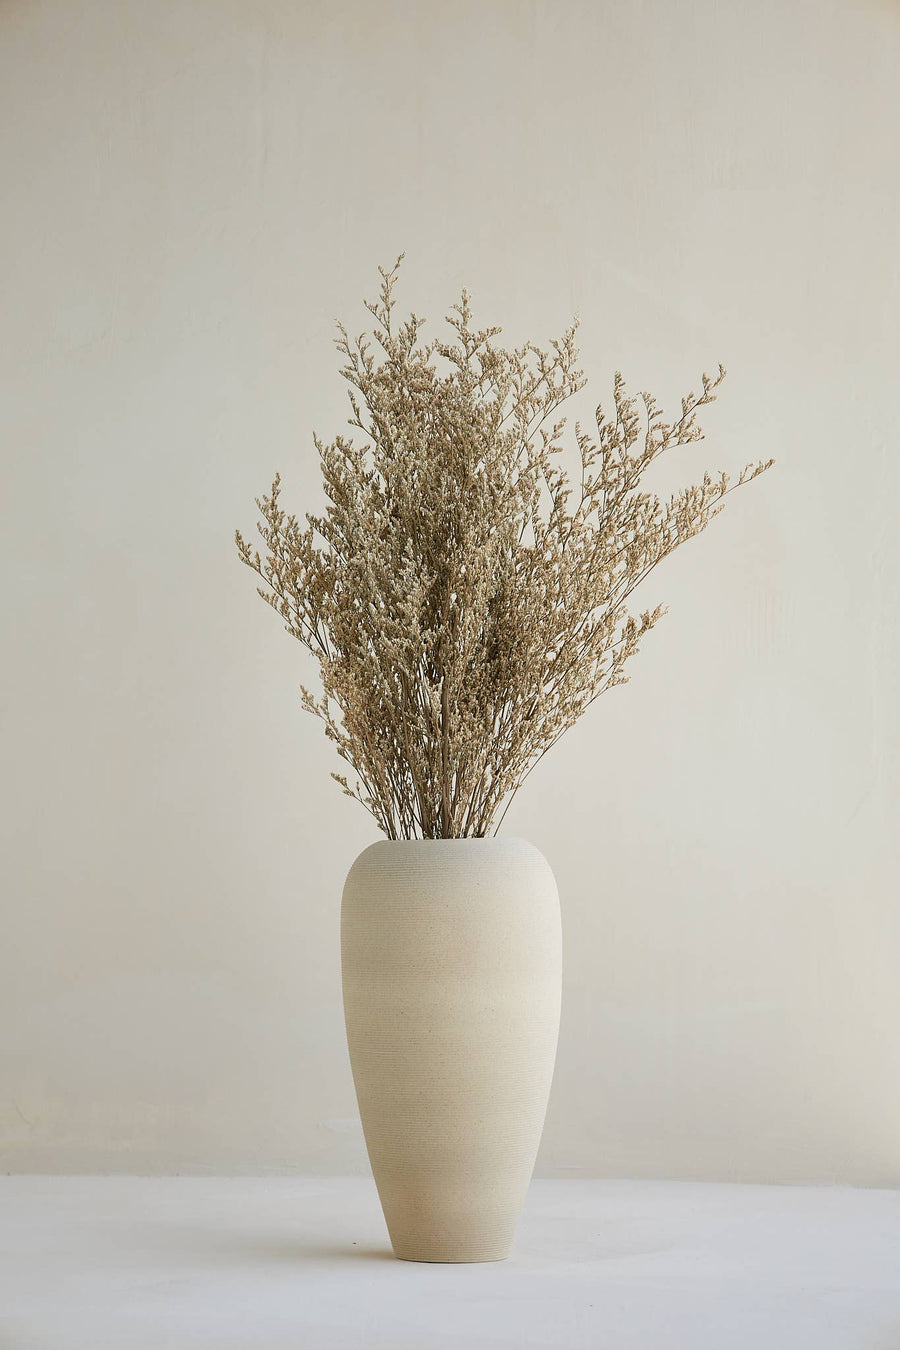 For Love Of Pampas - Limonium Branches in Natural